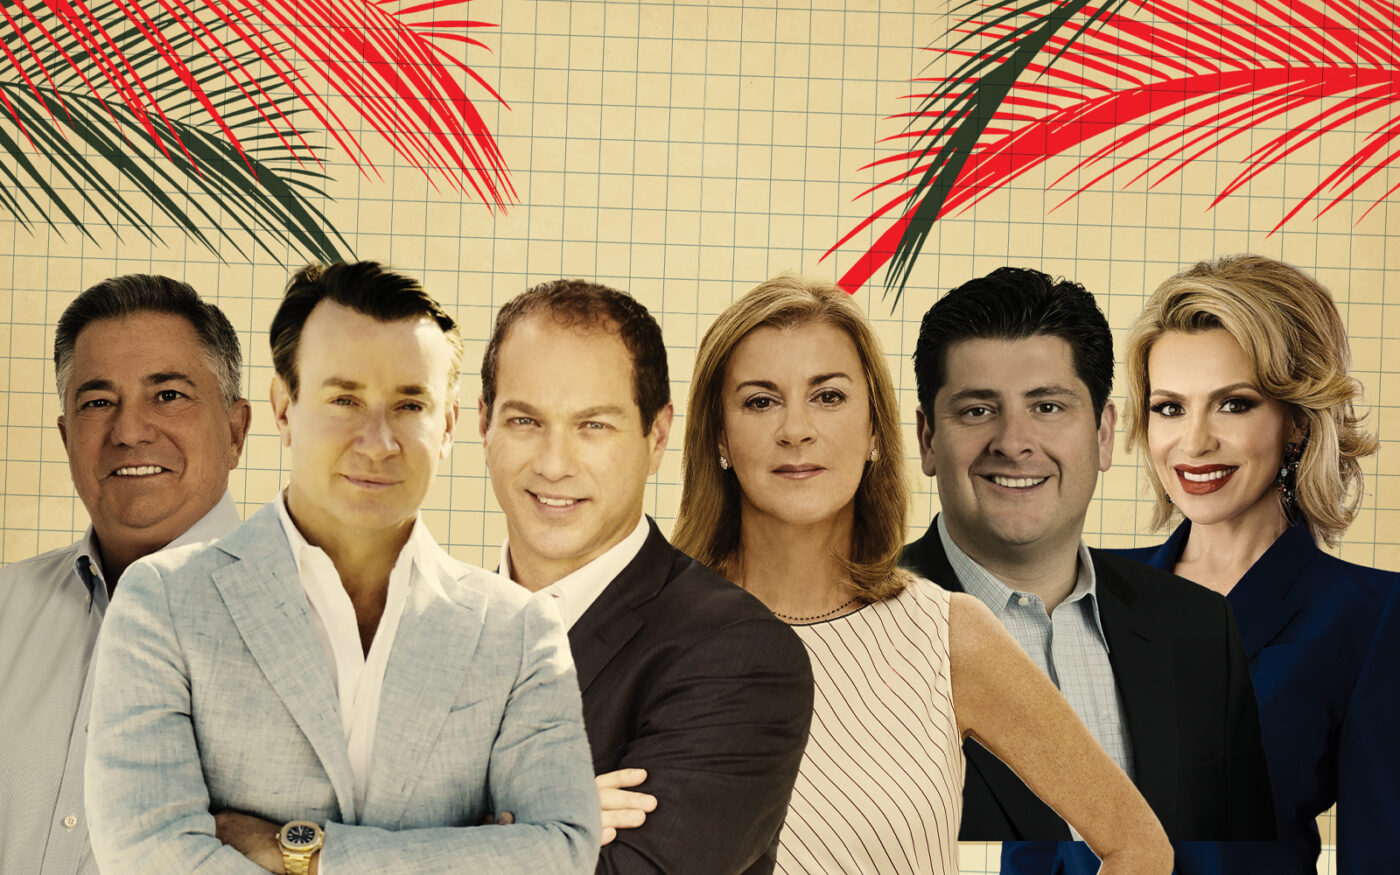 From left: Royal Palm Properties’ David Roberts, Douglas Elliman’s Chris Leavitt, Corcoran Group’s Dana Koch and Candace Friis, Christian Angle Real Estate’s Christian Angle and Douglas Elliman’s Senada Adzem (Photo-illustration by Kevin Cifuentes/The Real Deal; Getty Images, Douglas Elliman, Corcoran Group, Christian Angle Real Estate, Royal Palms Properties)